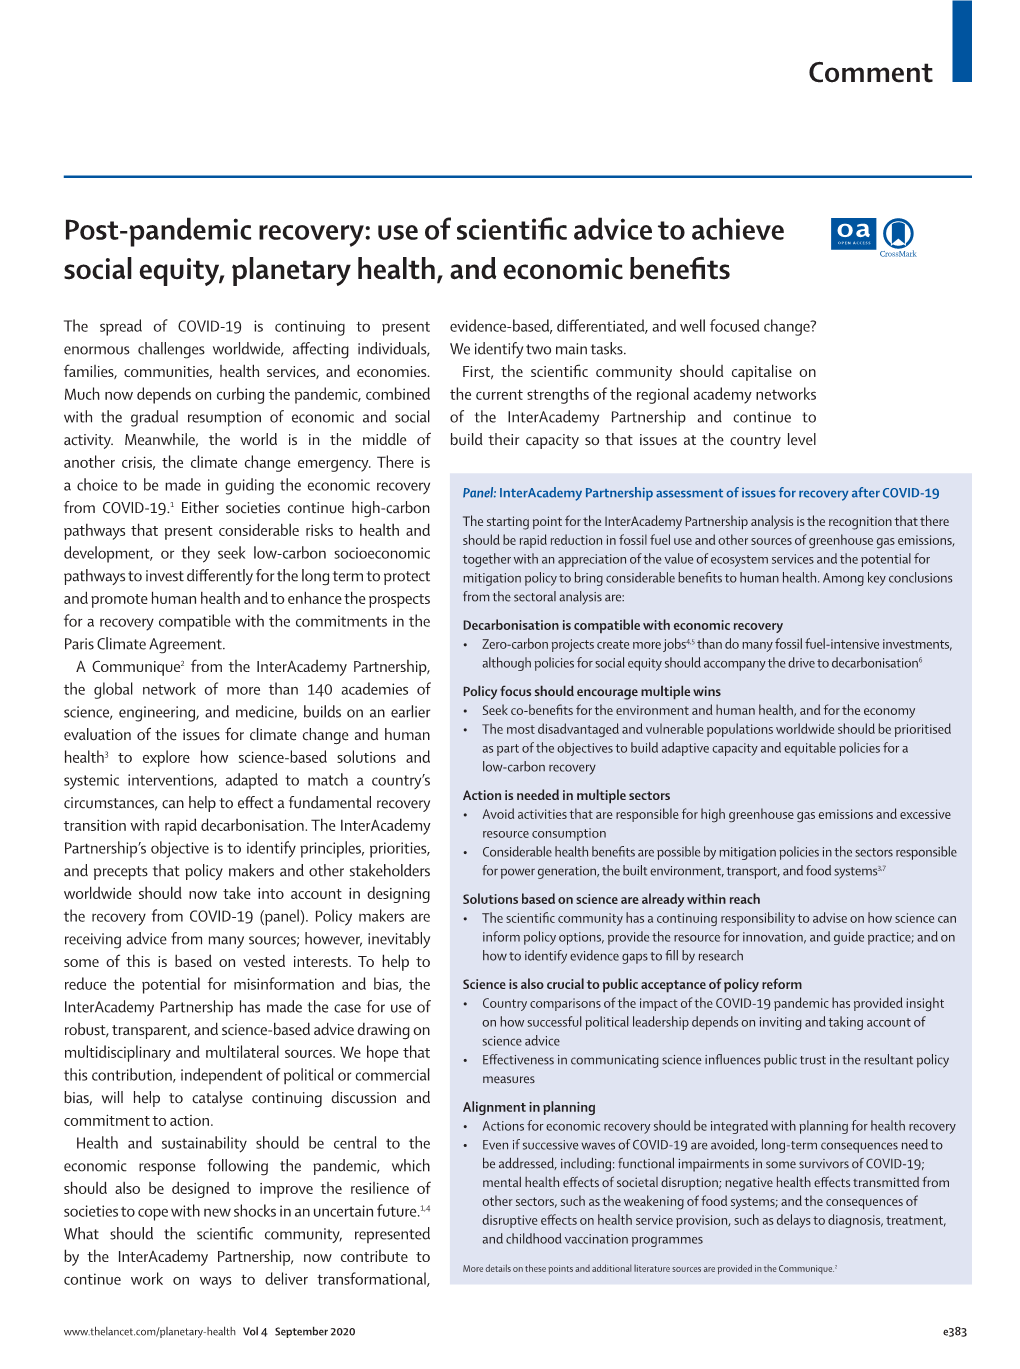 Post-Pandemic Recovery: Use of Scientific Advice to Achieve Social Equity, Planetary Health, and Economic Benefits